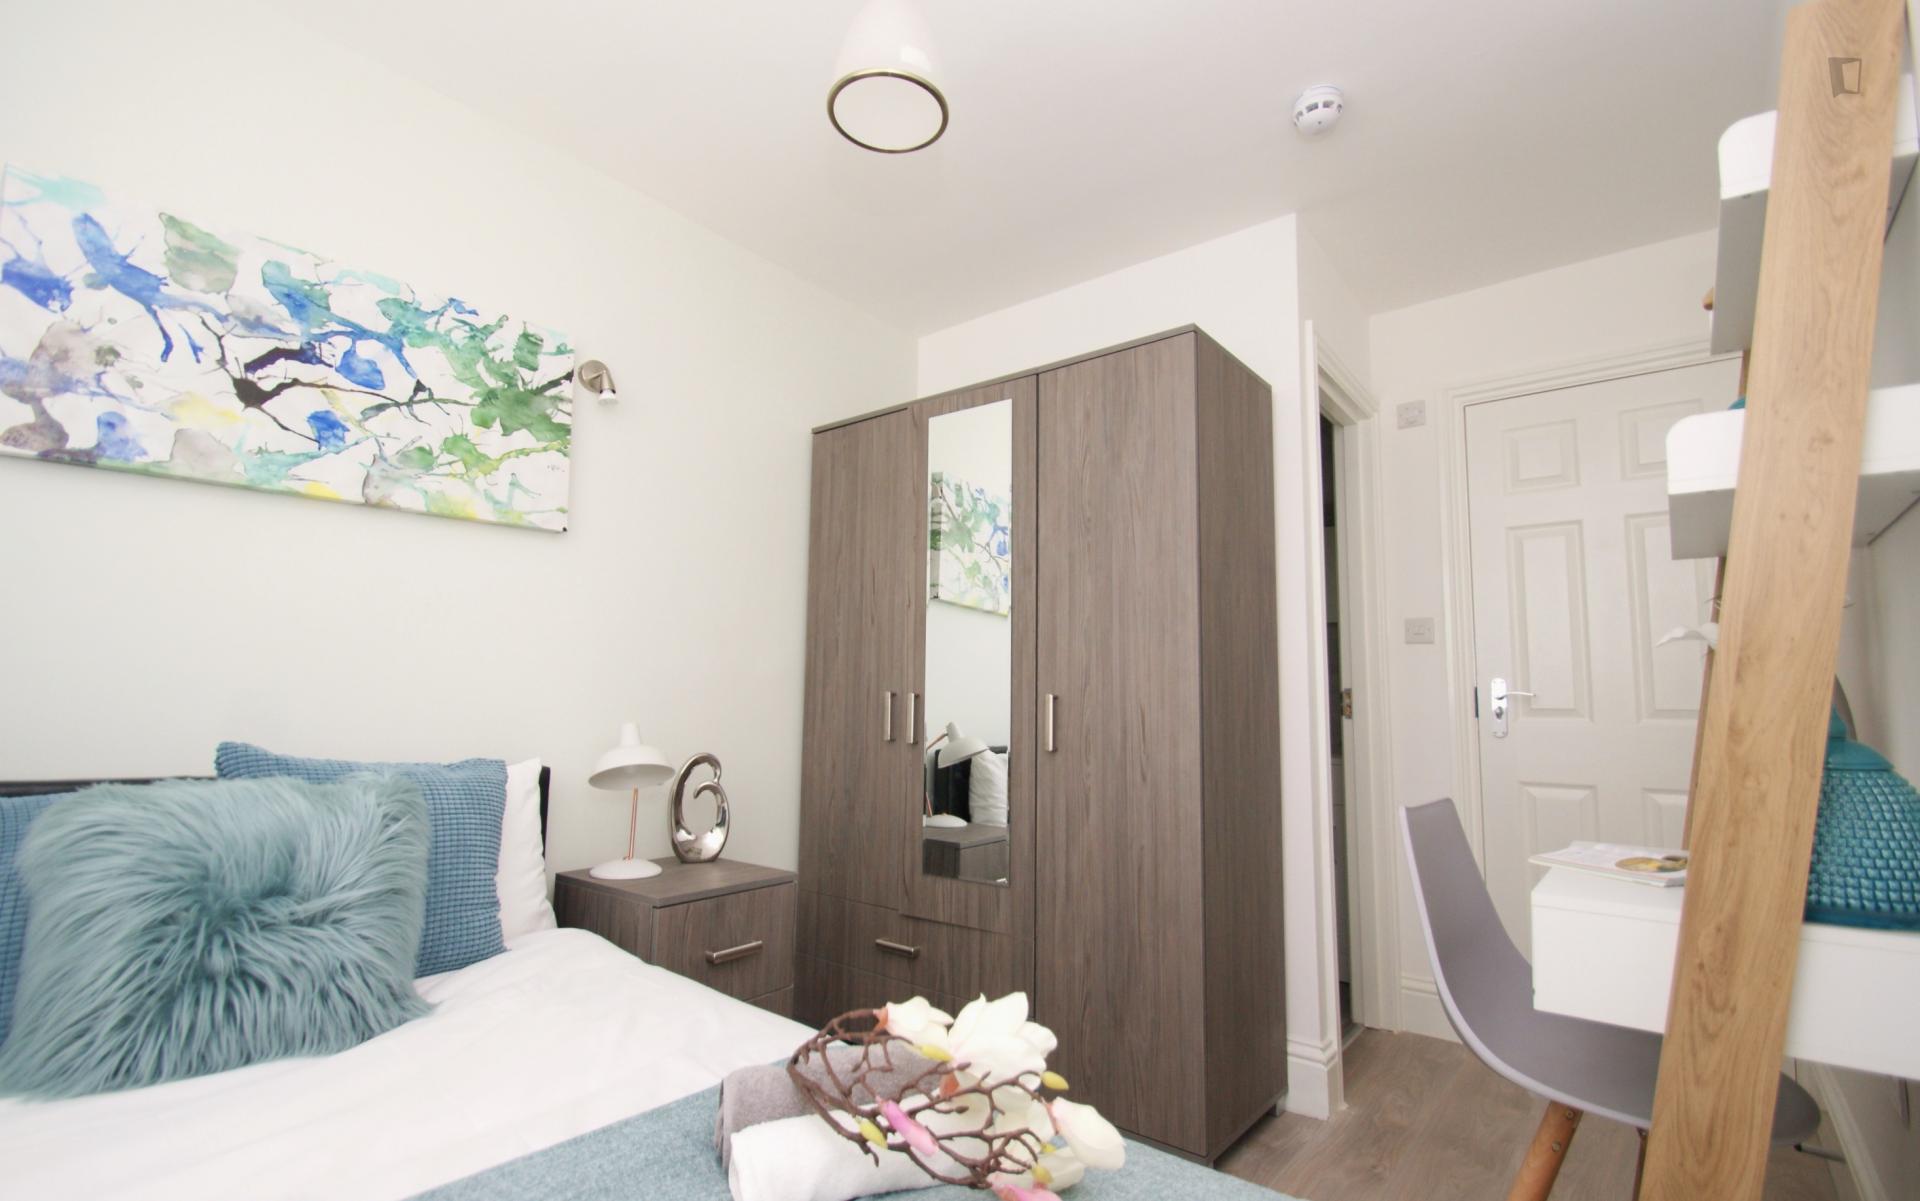 Cane Road - Double suite bedroom in London